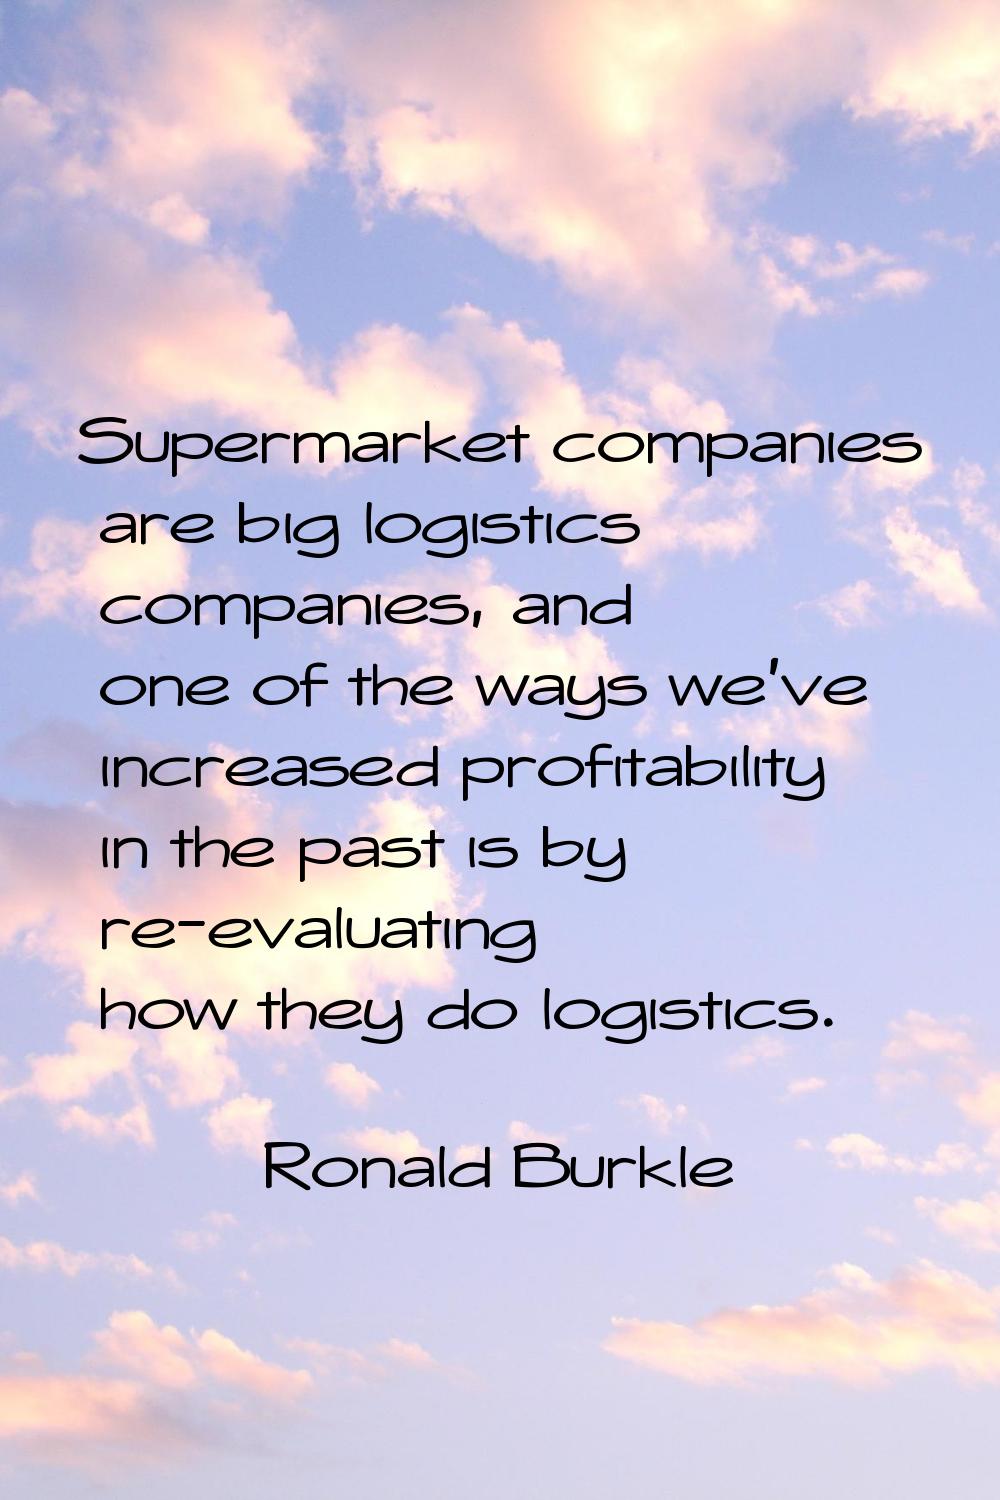 Supermarket companies are big logistics companies, and one of the ways we've increased profitabilit